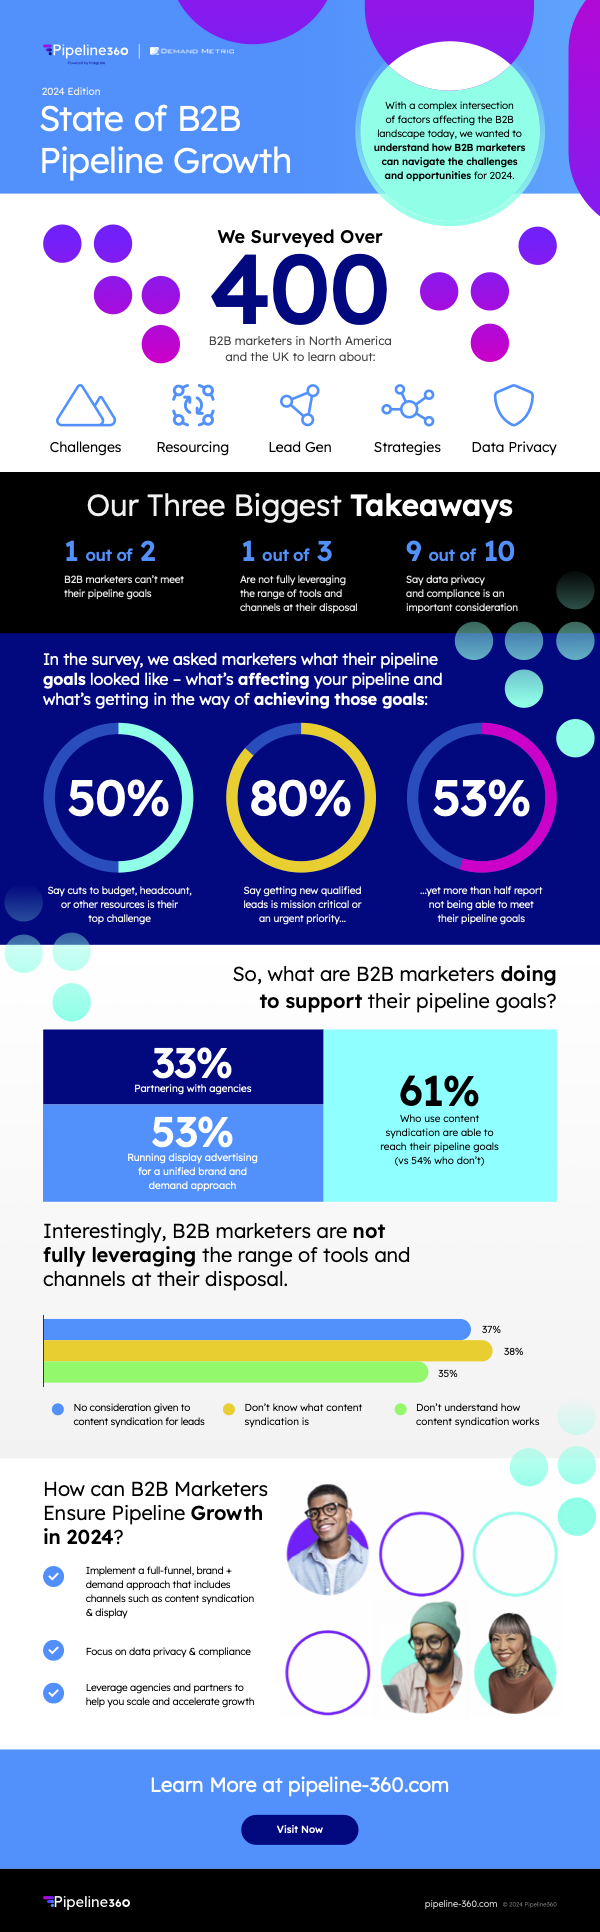 B2B marketing trends and infographic for 2024